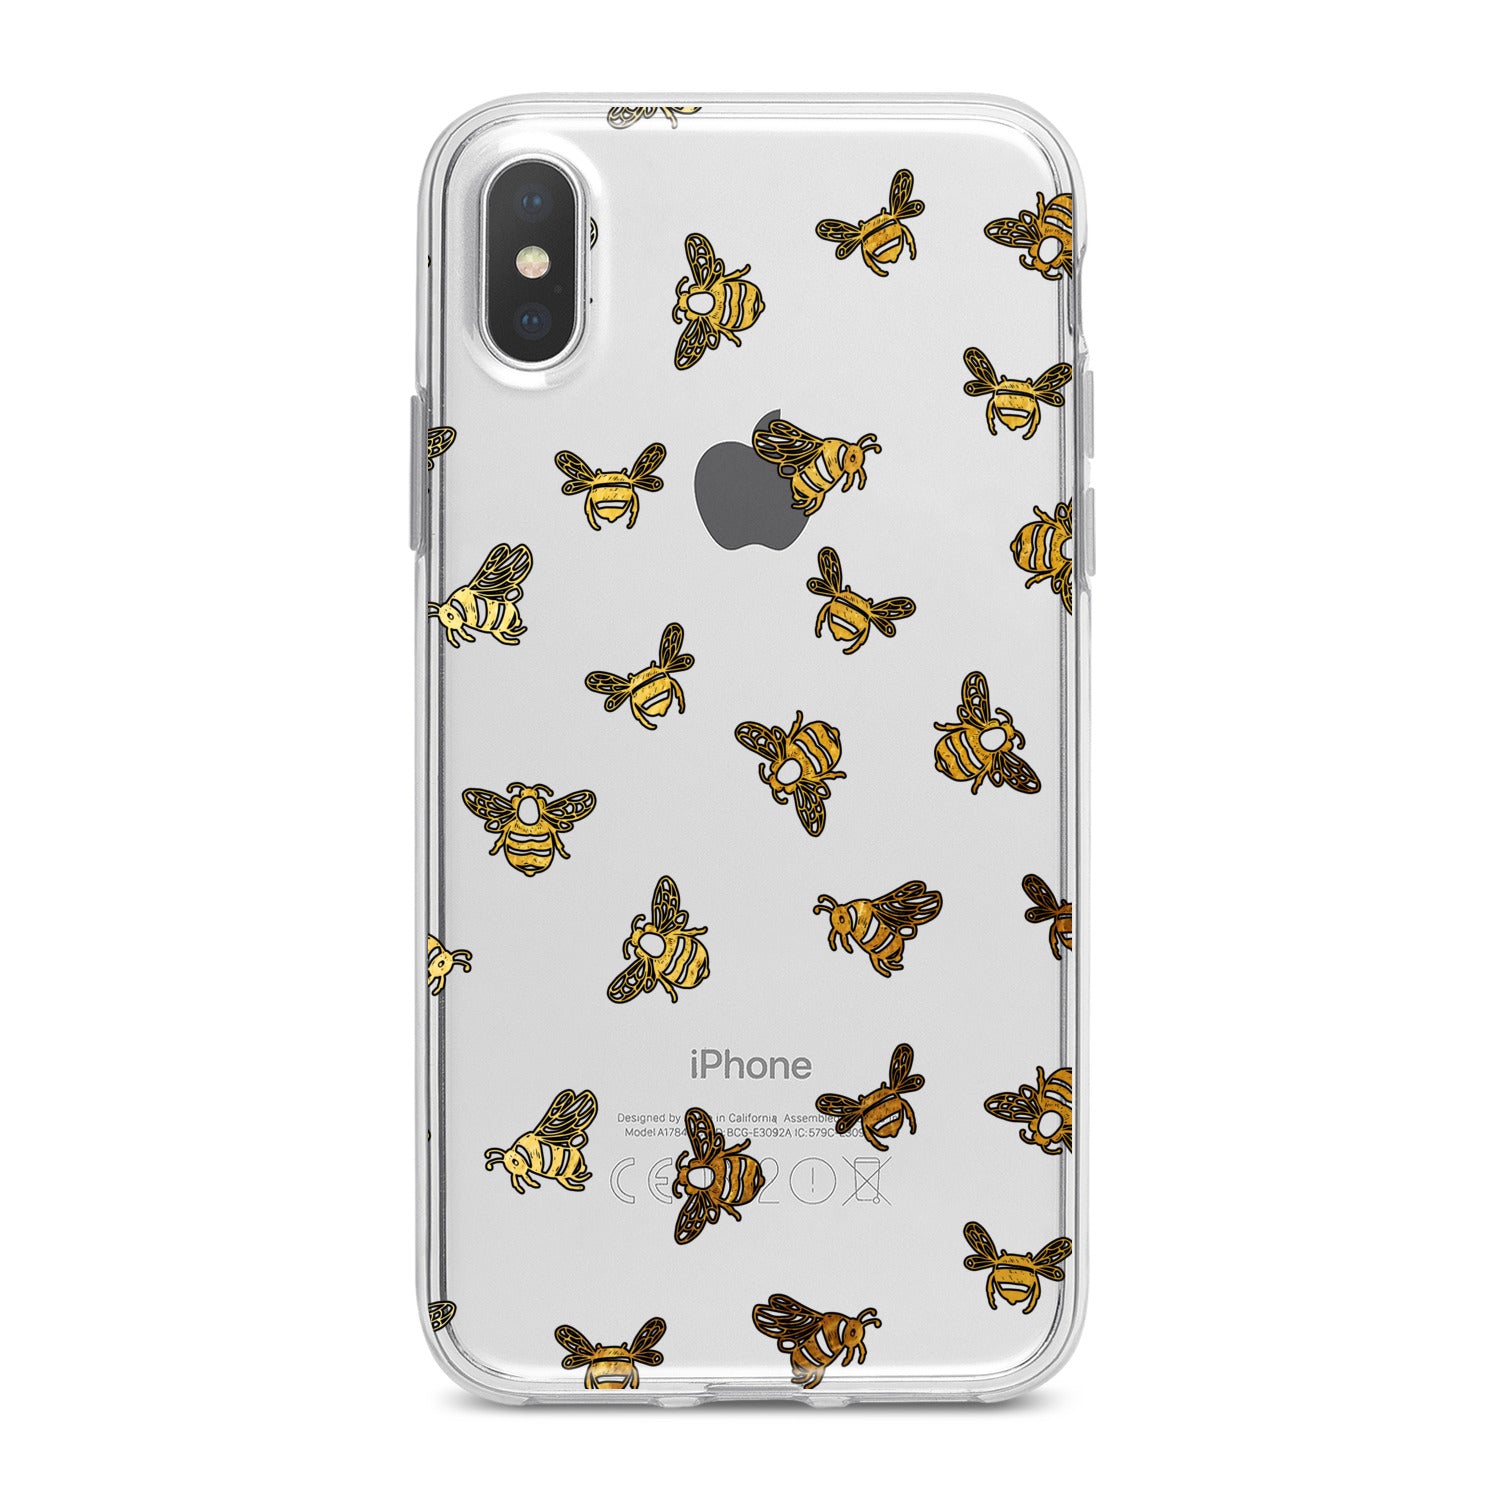 Lex Altern Honeybee Pattern Phone Case for your iPhone & Android phone.